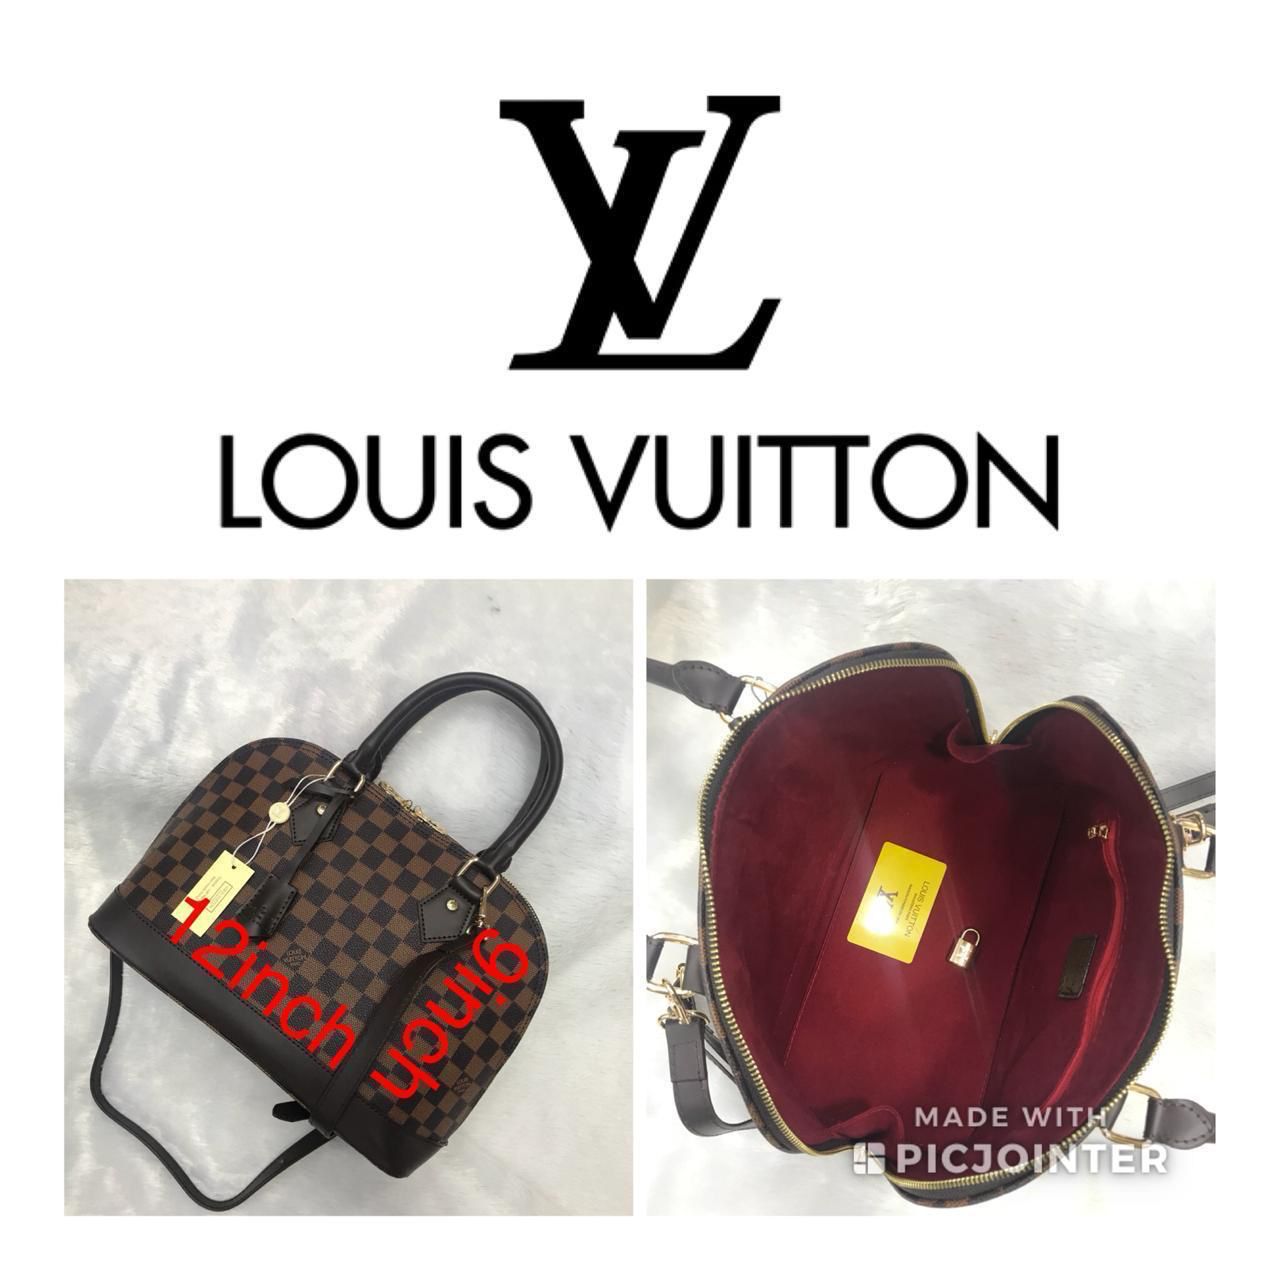 LV ALMA PM Premium Quality Women's Handbag With Sling BELT in Brown And With Dust Cover, Key & Lock Facility Women's Or Girls- Classy Look And Best Quality Product Bag LV-AL-02